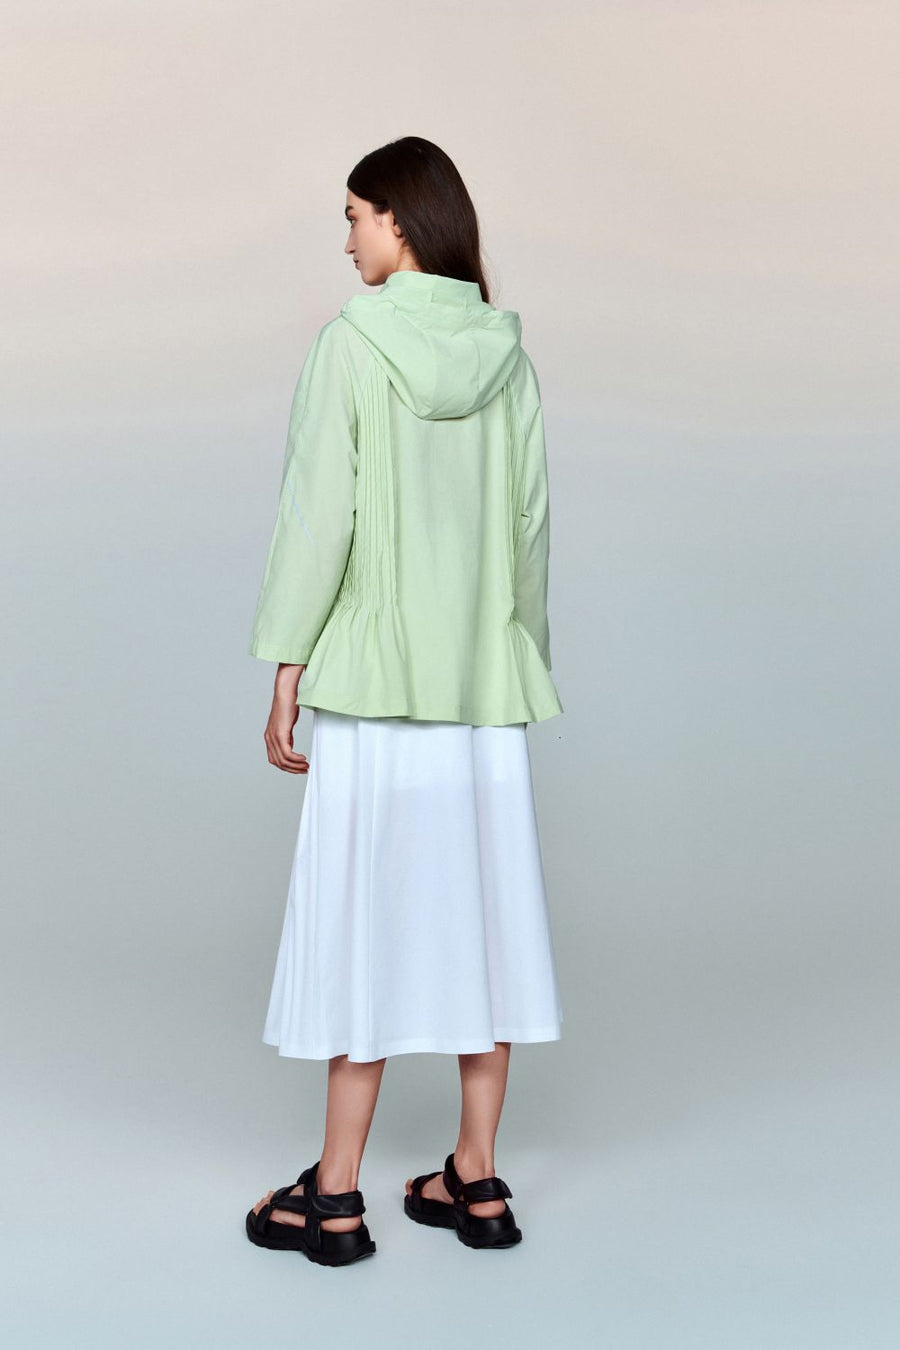 Bianca Essential Water- and Wind-resistant Midi Skirt with Pleated Panels